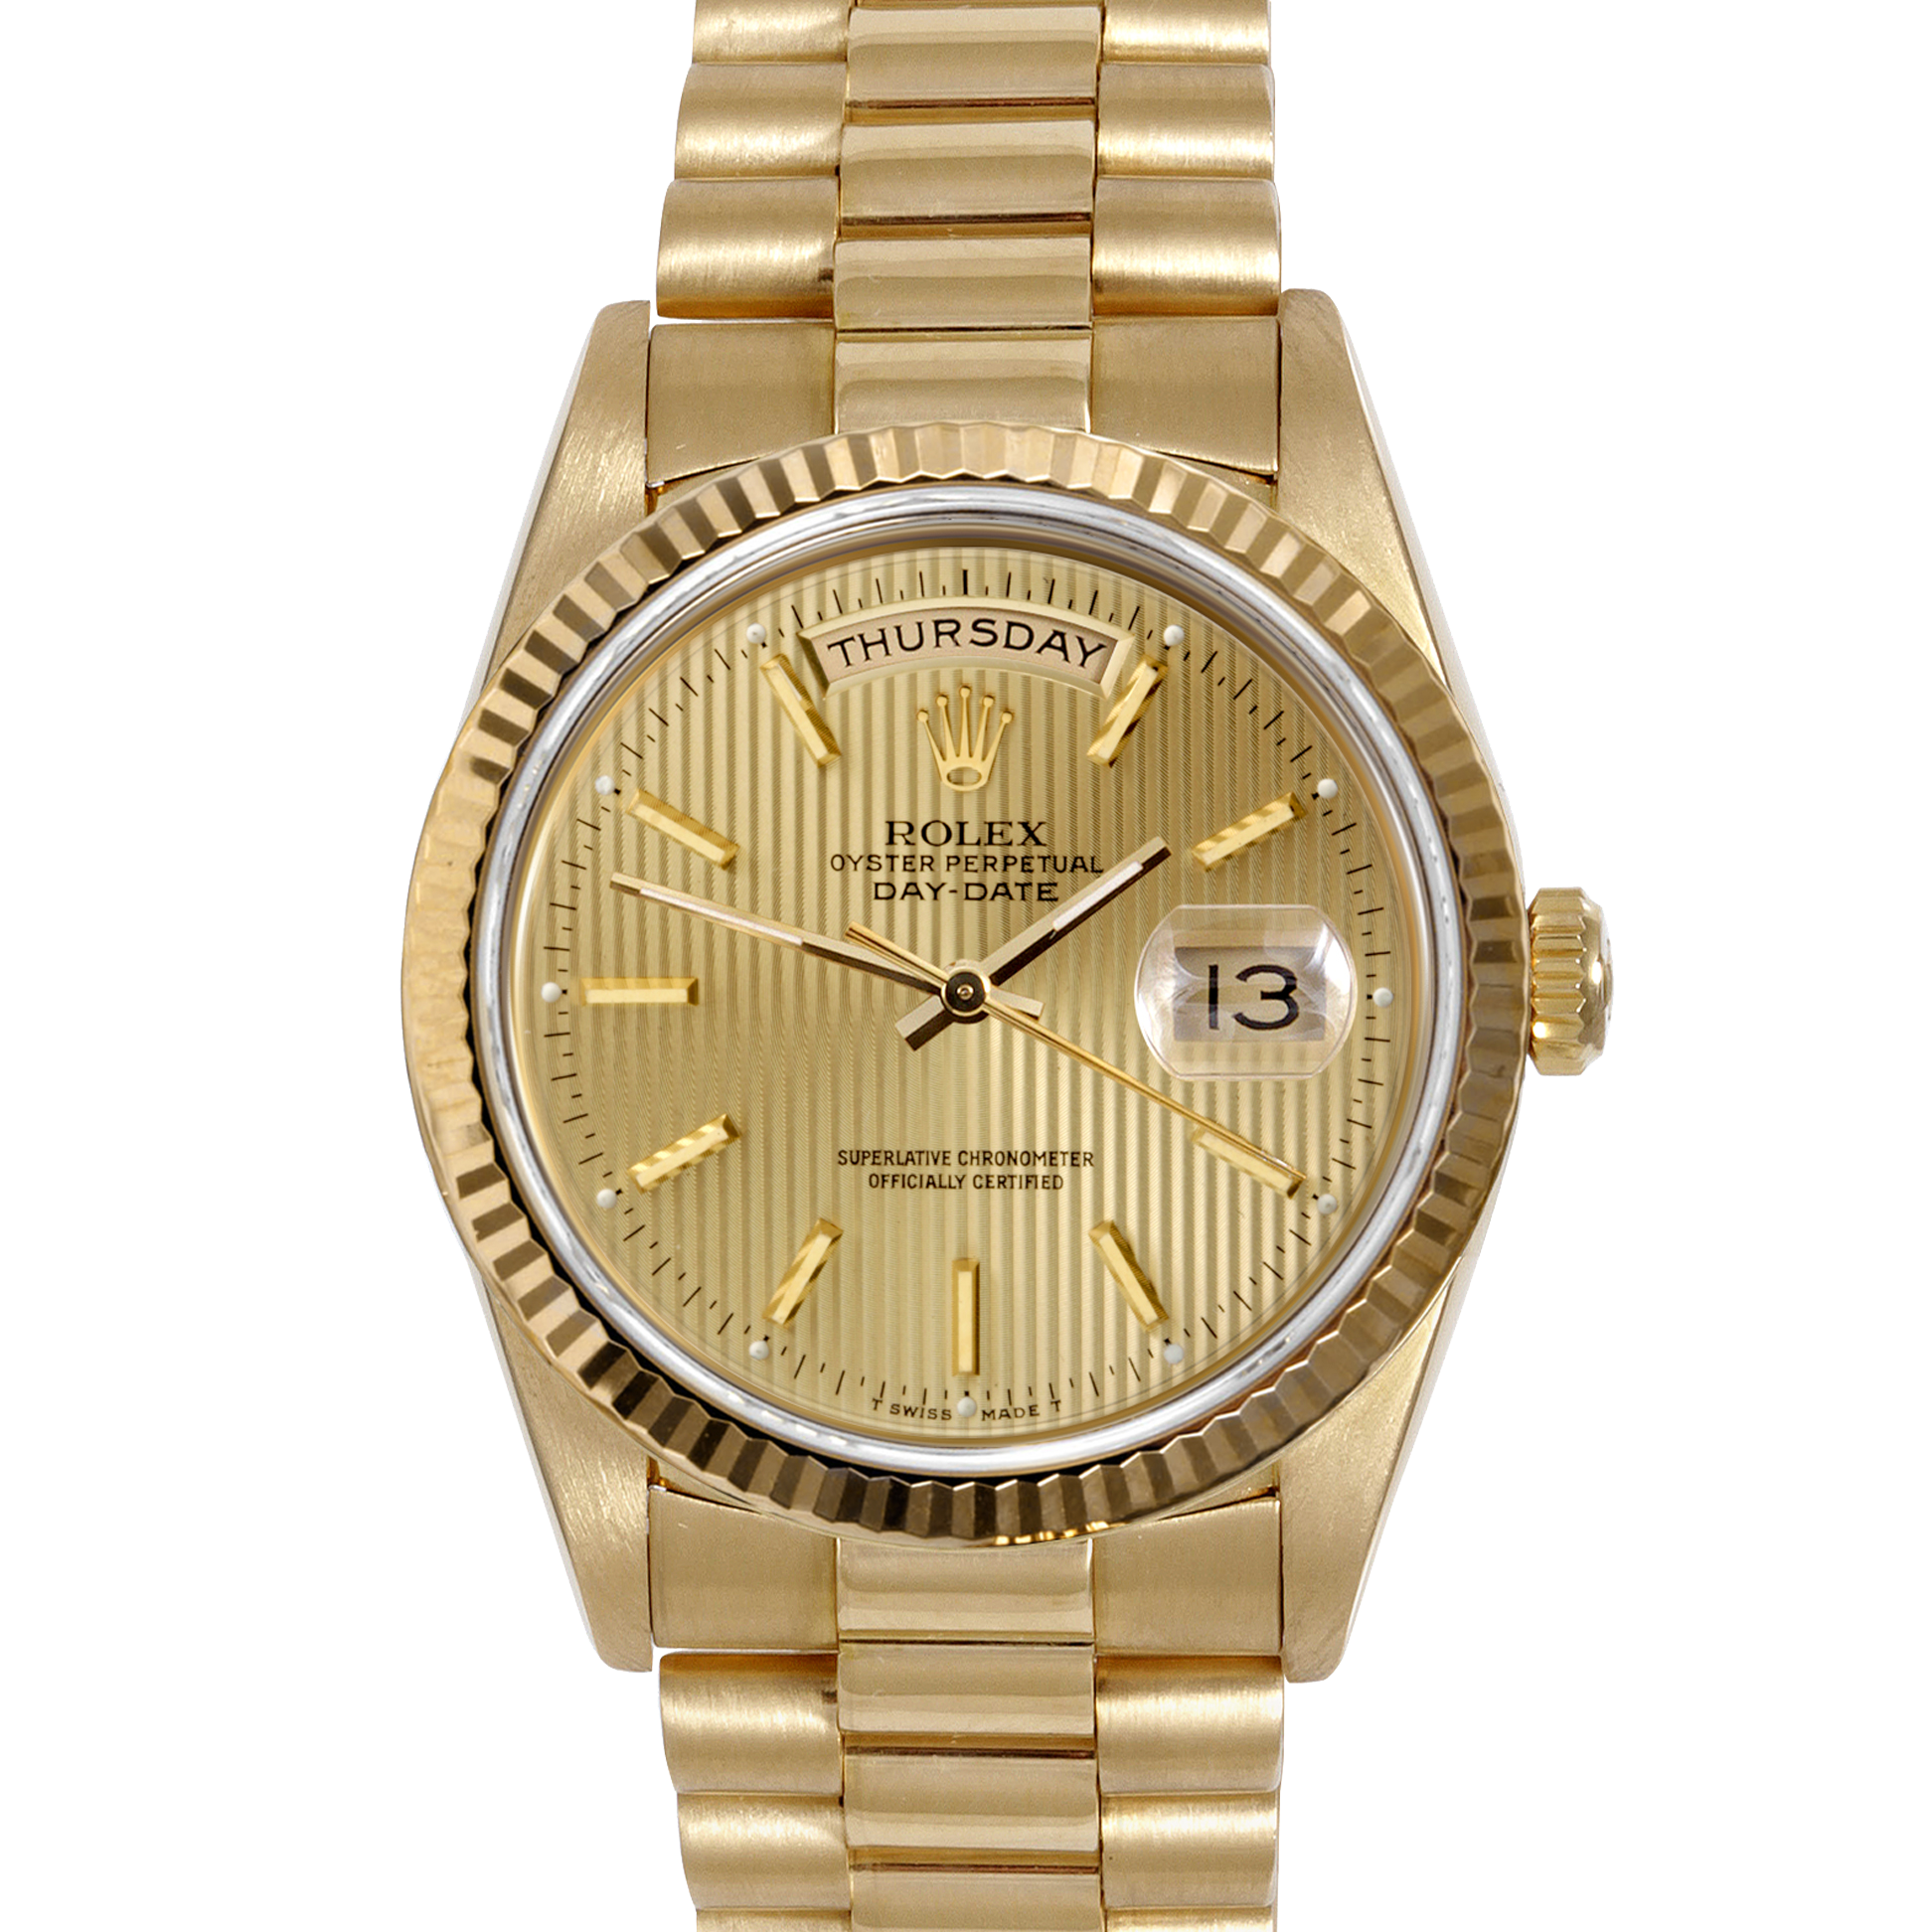 Datejust Gold Watch Rolex Watches Day-Date Clipart